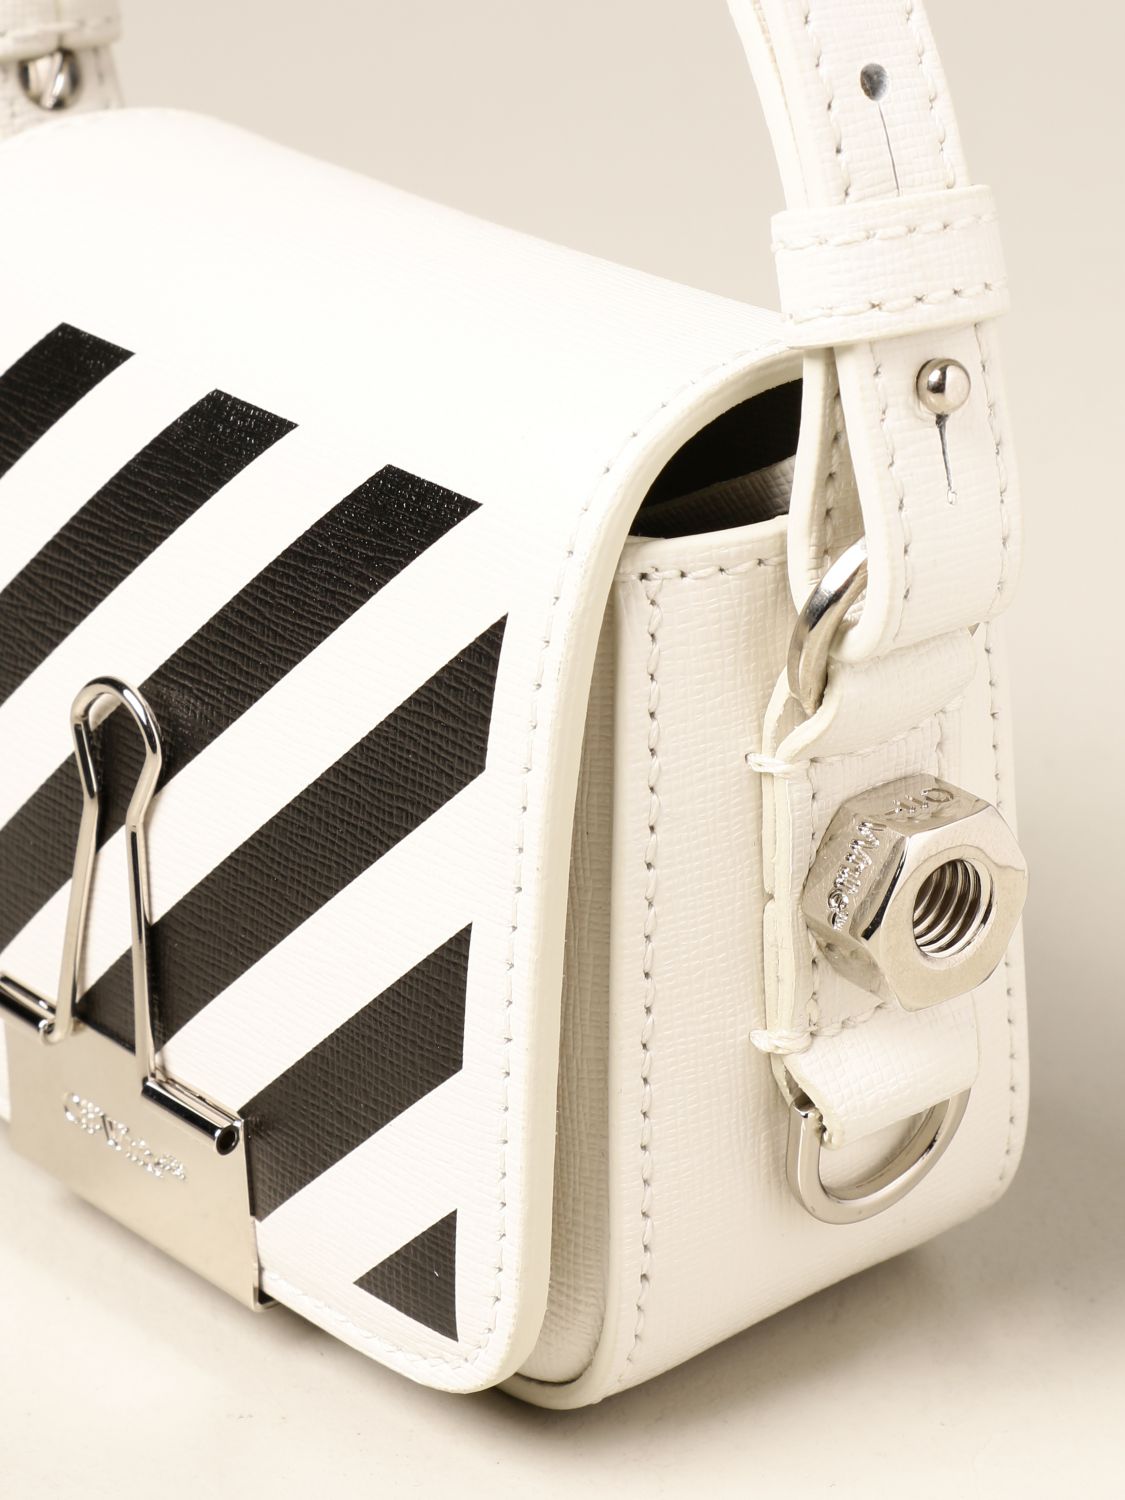 OFF-WHITE: Diag baby Off White bag / waist bag in saffiano leather